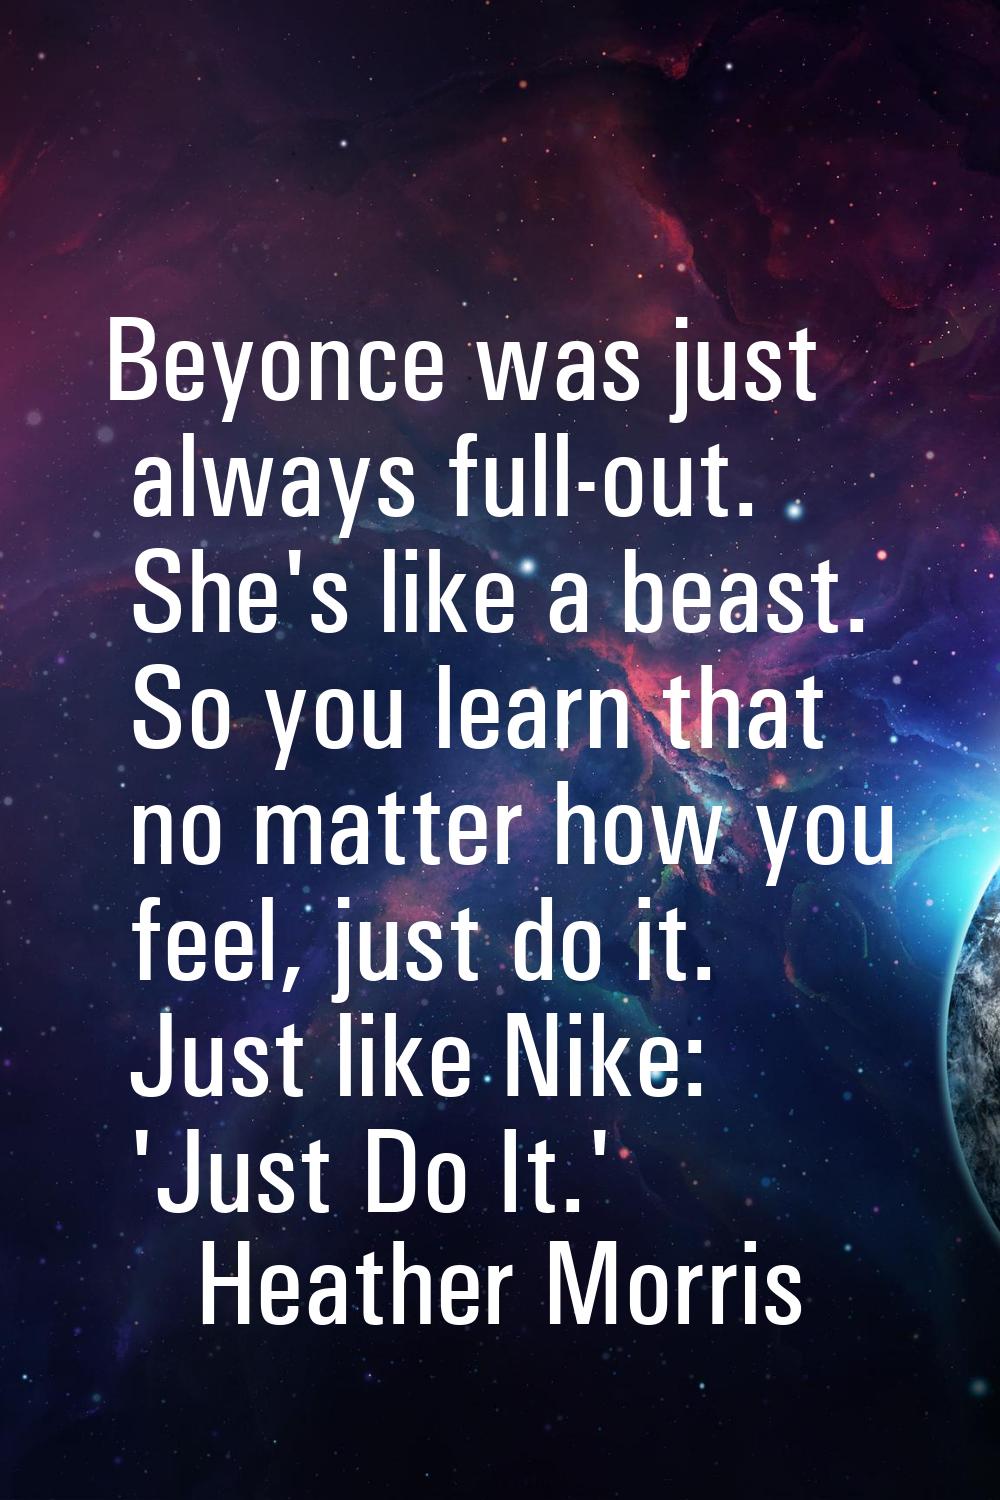 Beyonce was just always full-out. She's like a beast. So you learn that no matter how you feel, jus